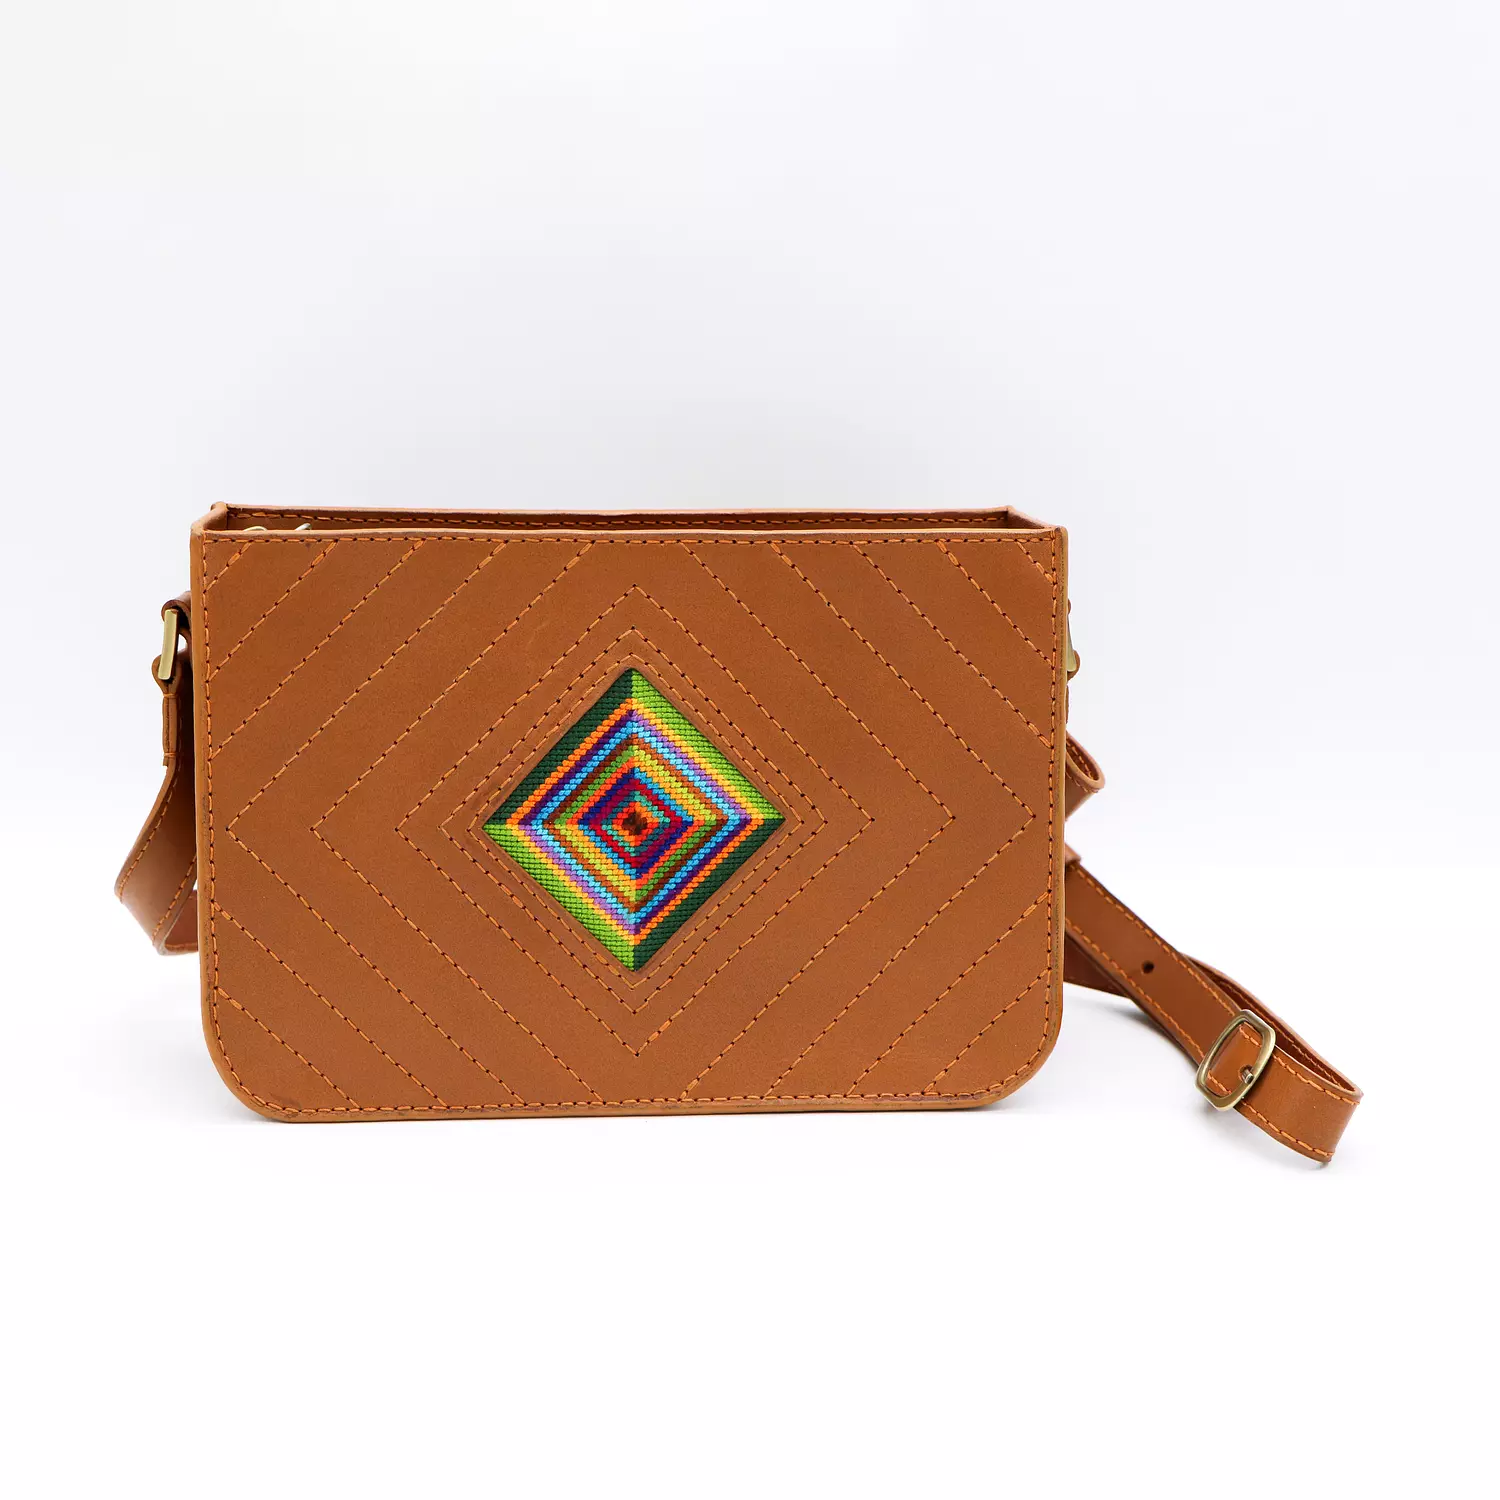 Genuine leather bag with colorful Cross-stitching 0